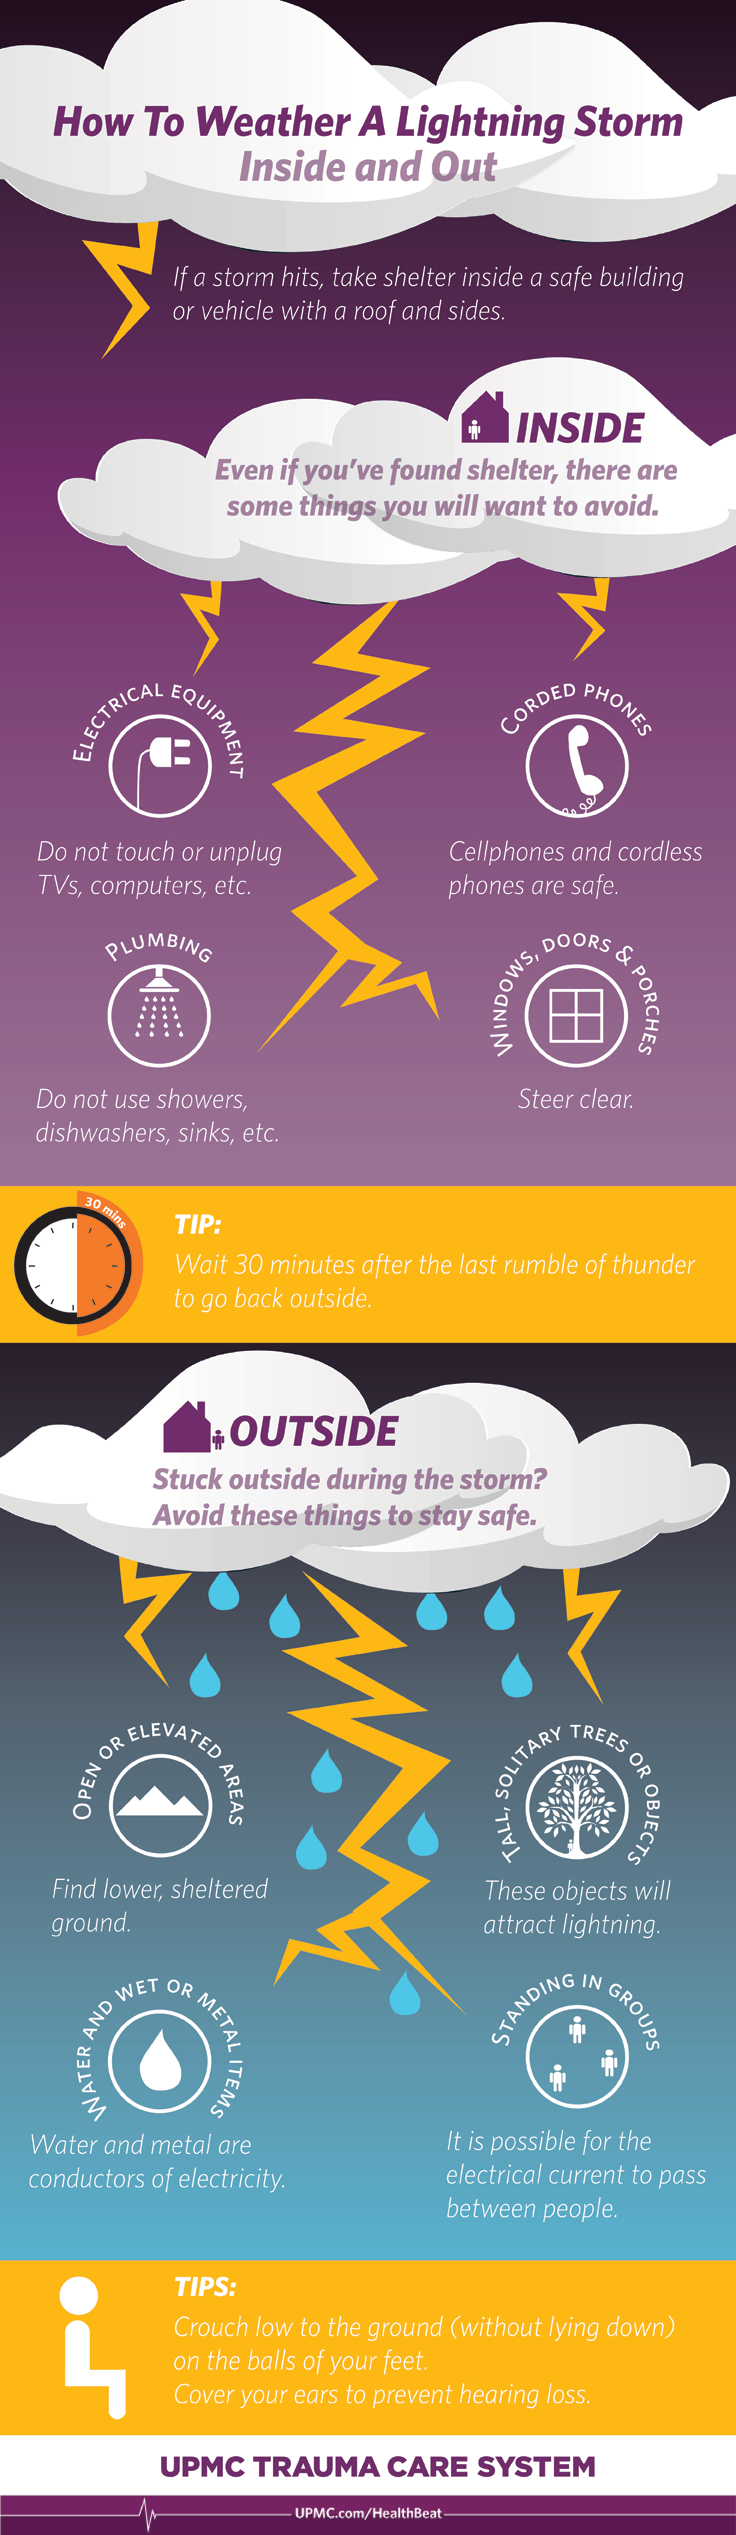 Tips for staying safe during a thunderstorm.